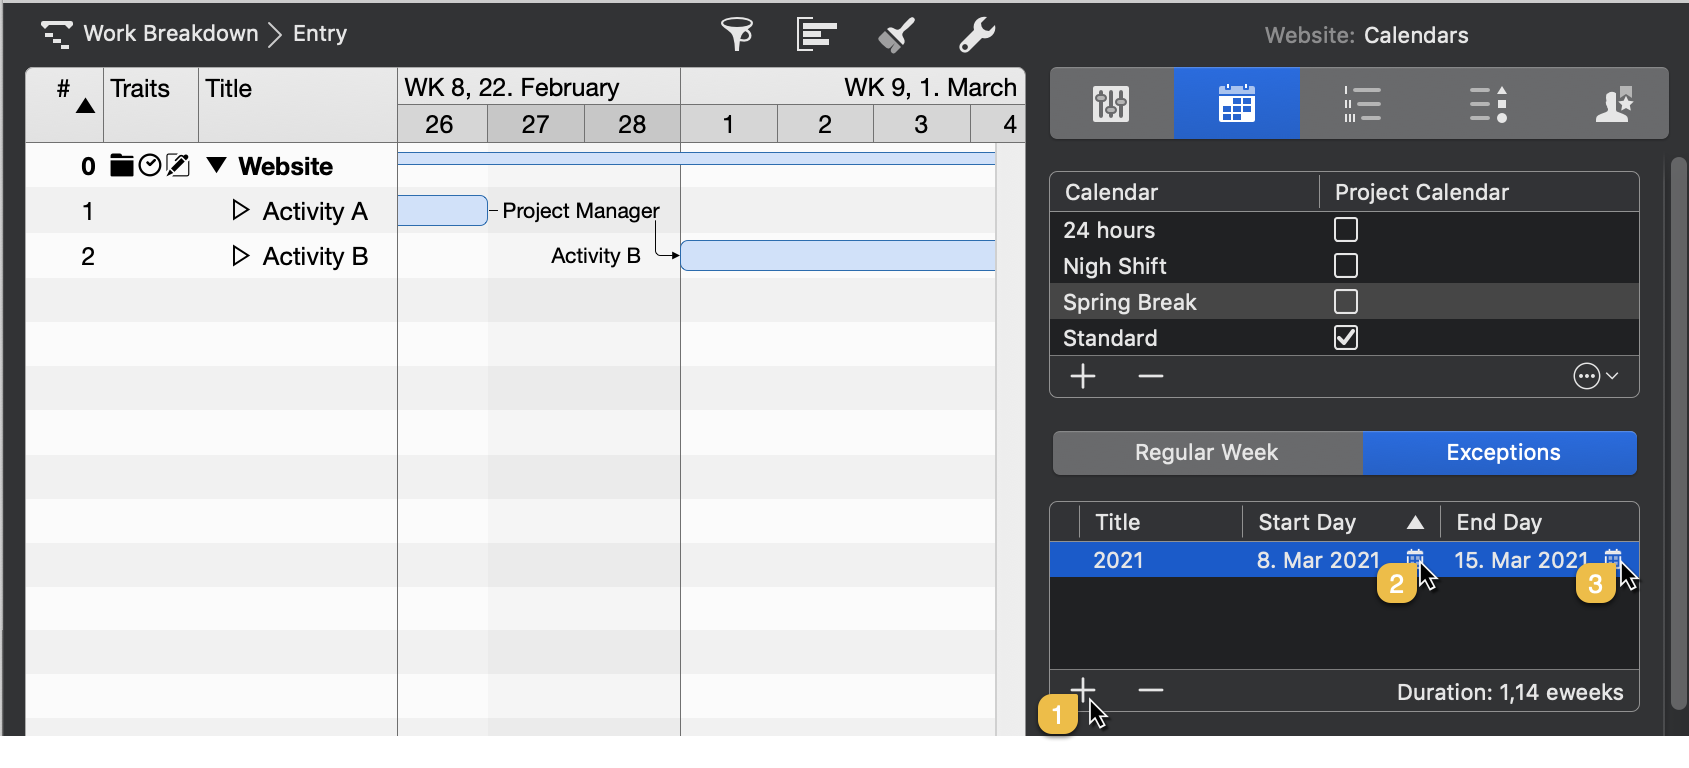 Special calendar with Exceptions